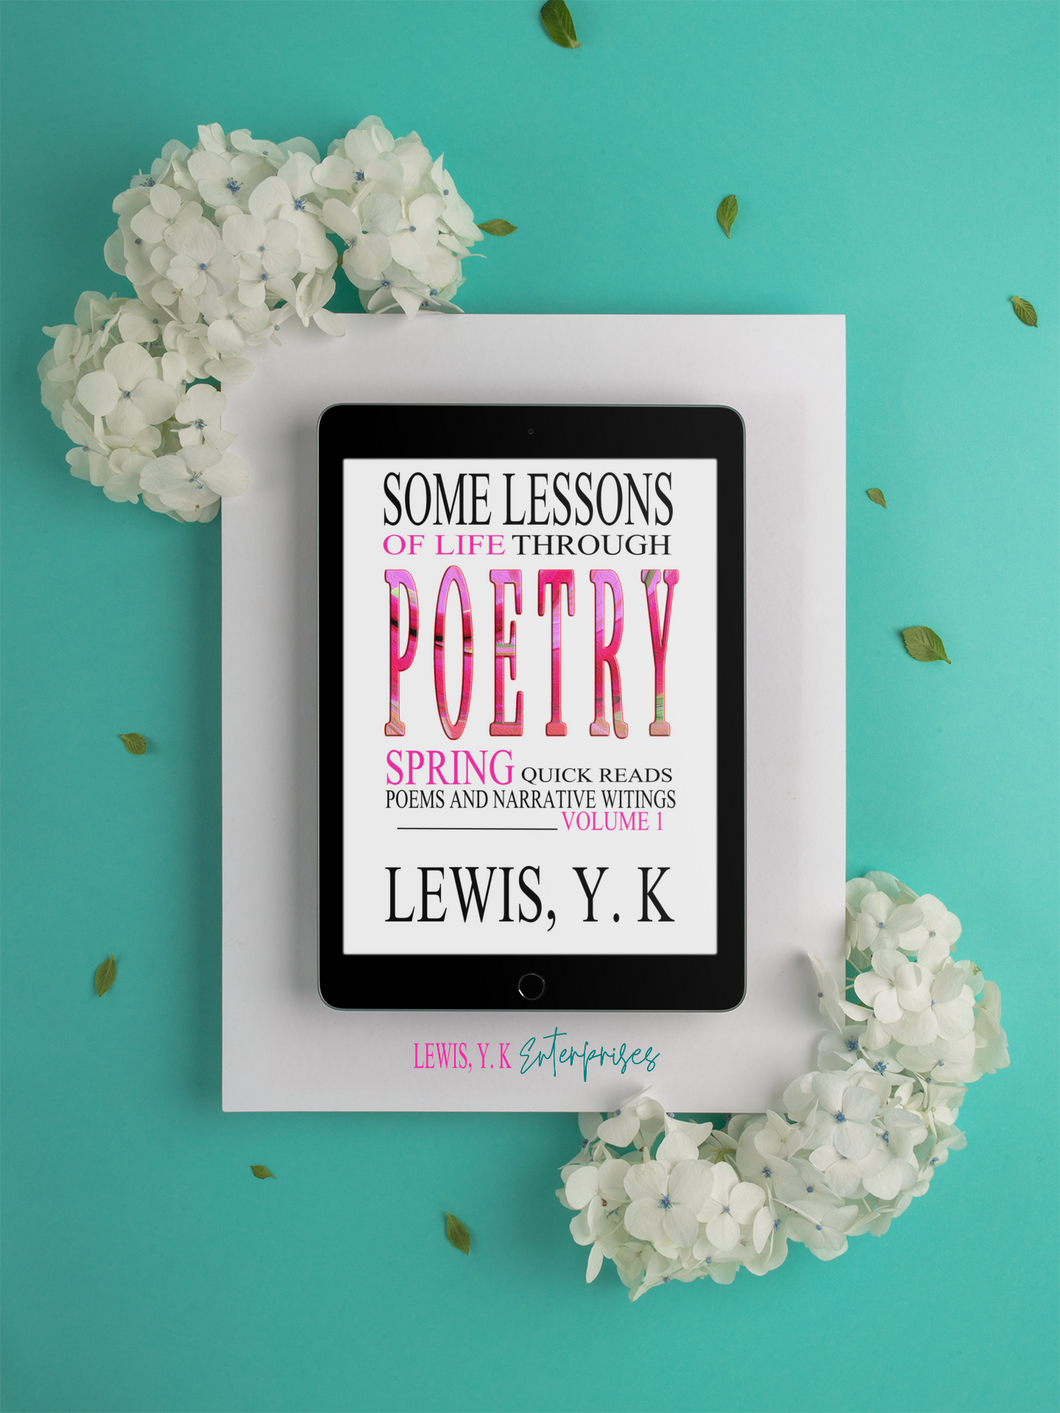 Some Lessons of Life Through Poetry Spring Vol. 1 | Epub ebook ISBN: 978-1-95086-02-6